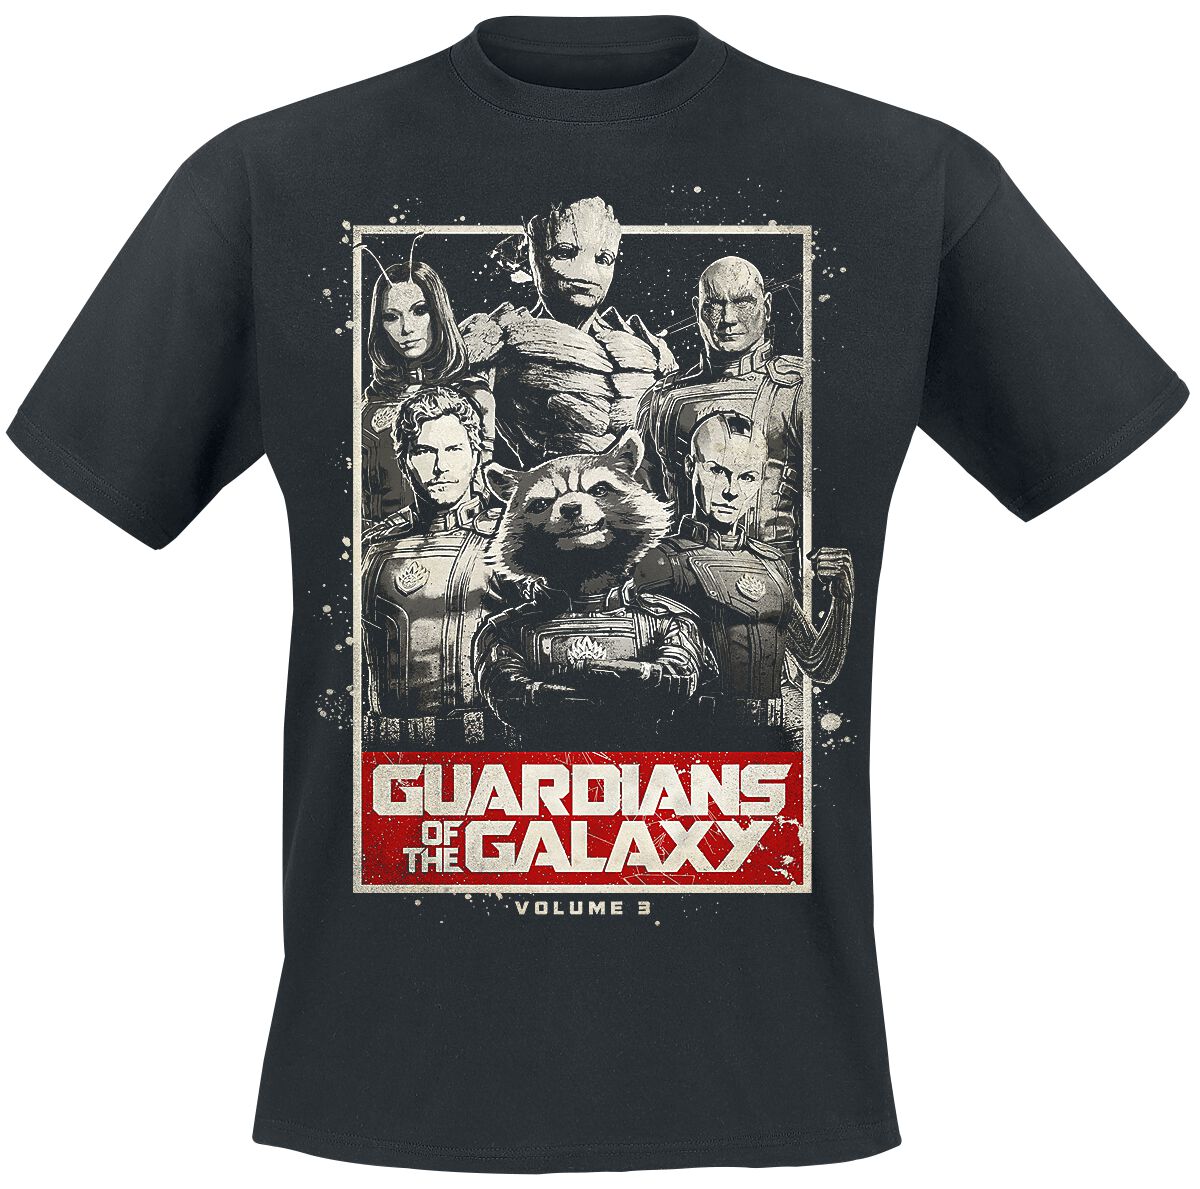 Guardians Of The Galaxy Vol. 3 - The Guardians T-Shirt schwarz in XXL von Guardians Of The Galaxy